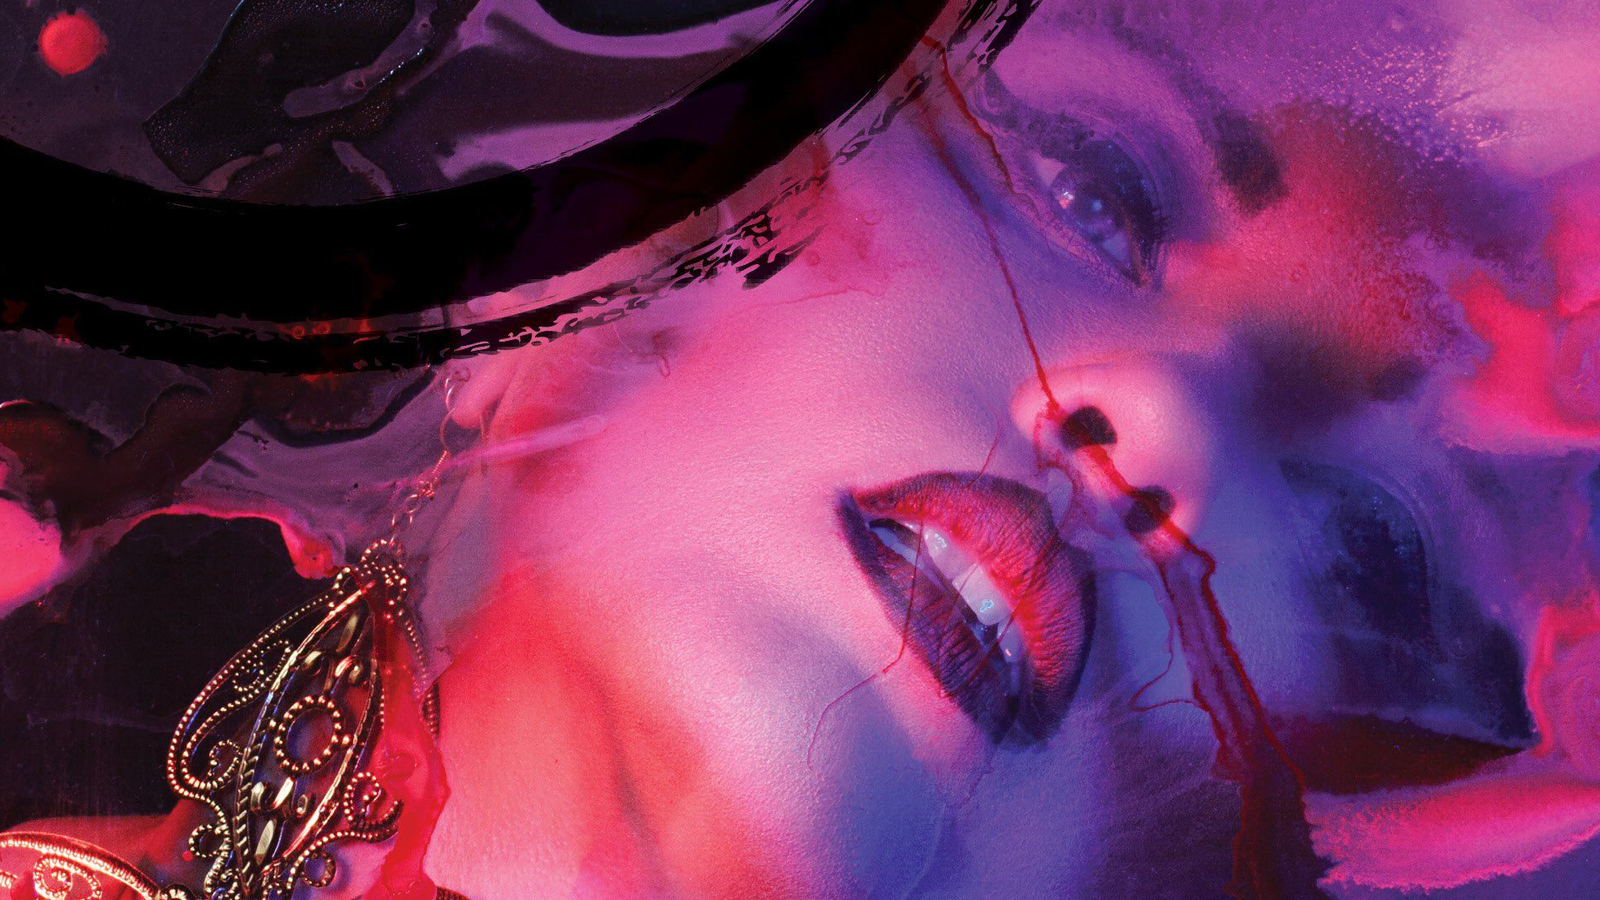 QUIZ: Which Vampire the Masquerade Clan Are You?